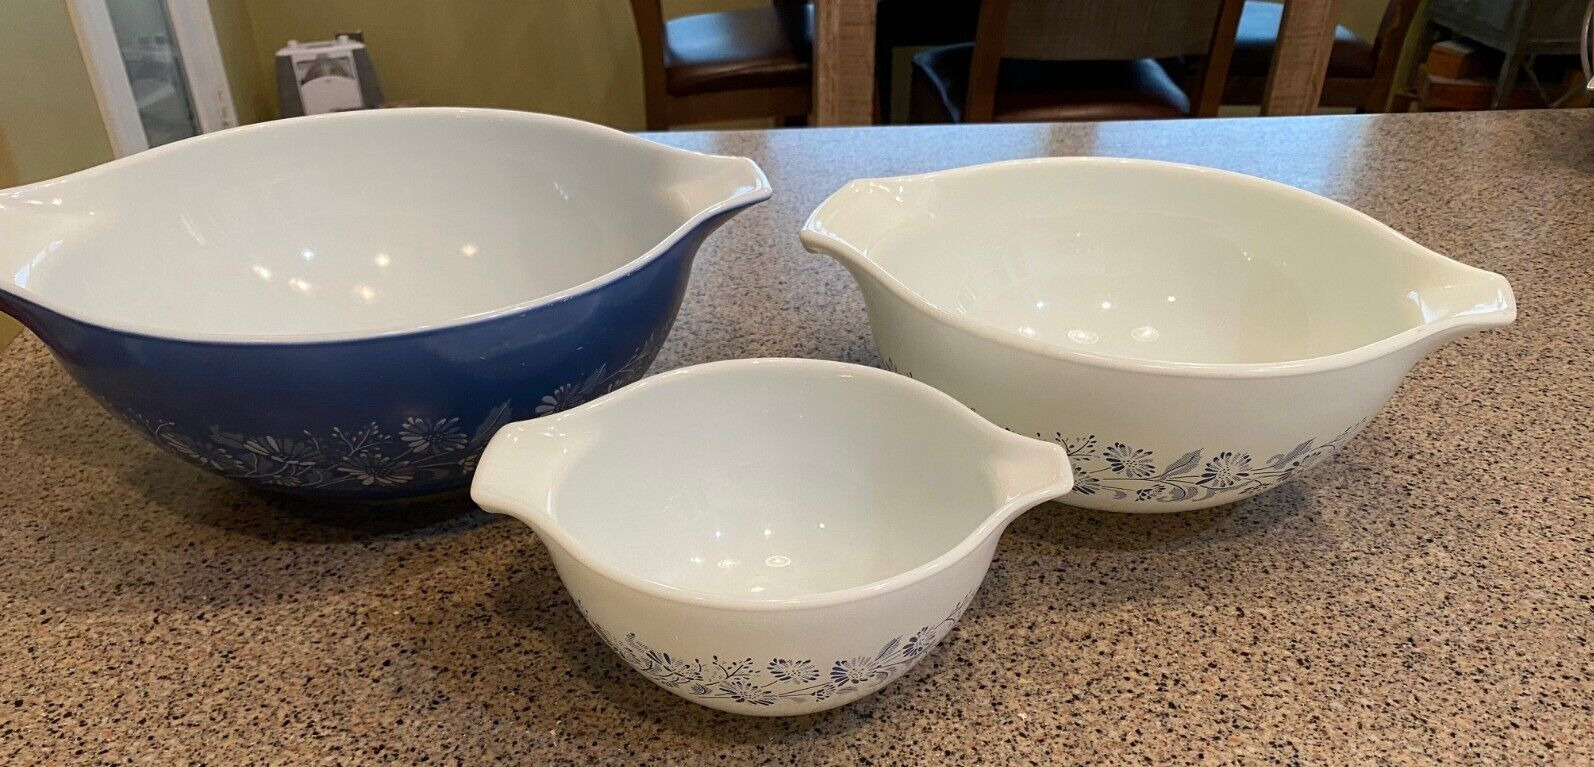 Pyrex Colonial Mist pattern nesting bowls, LOT OF 3, white/blue, 441, 443, 4444